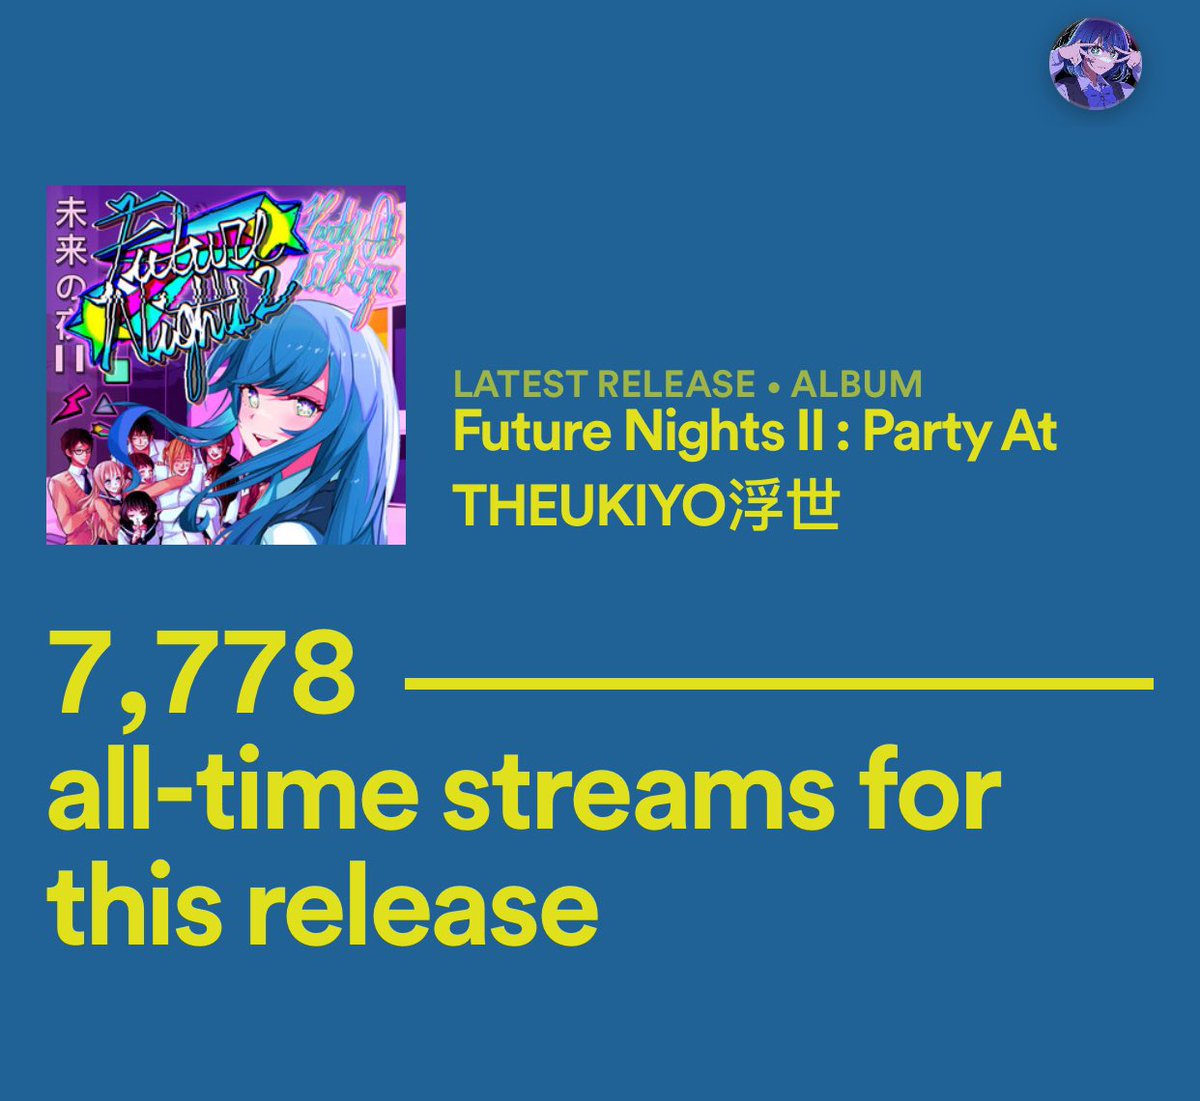 “FUTURE NIGHTS II : Party At THEUKIYO浮世” is now available on Spotify and BandCamp : theukiyo.bandcamp.com / berrygoodrecords.bandcamp.com 💖🪩💖 please go stream or purchase and share 💎💿 #futurefunk #futurefunkmusic #spotify